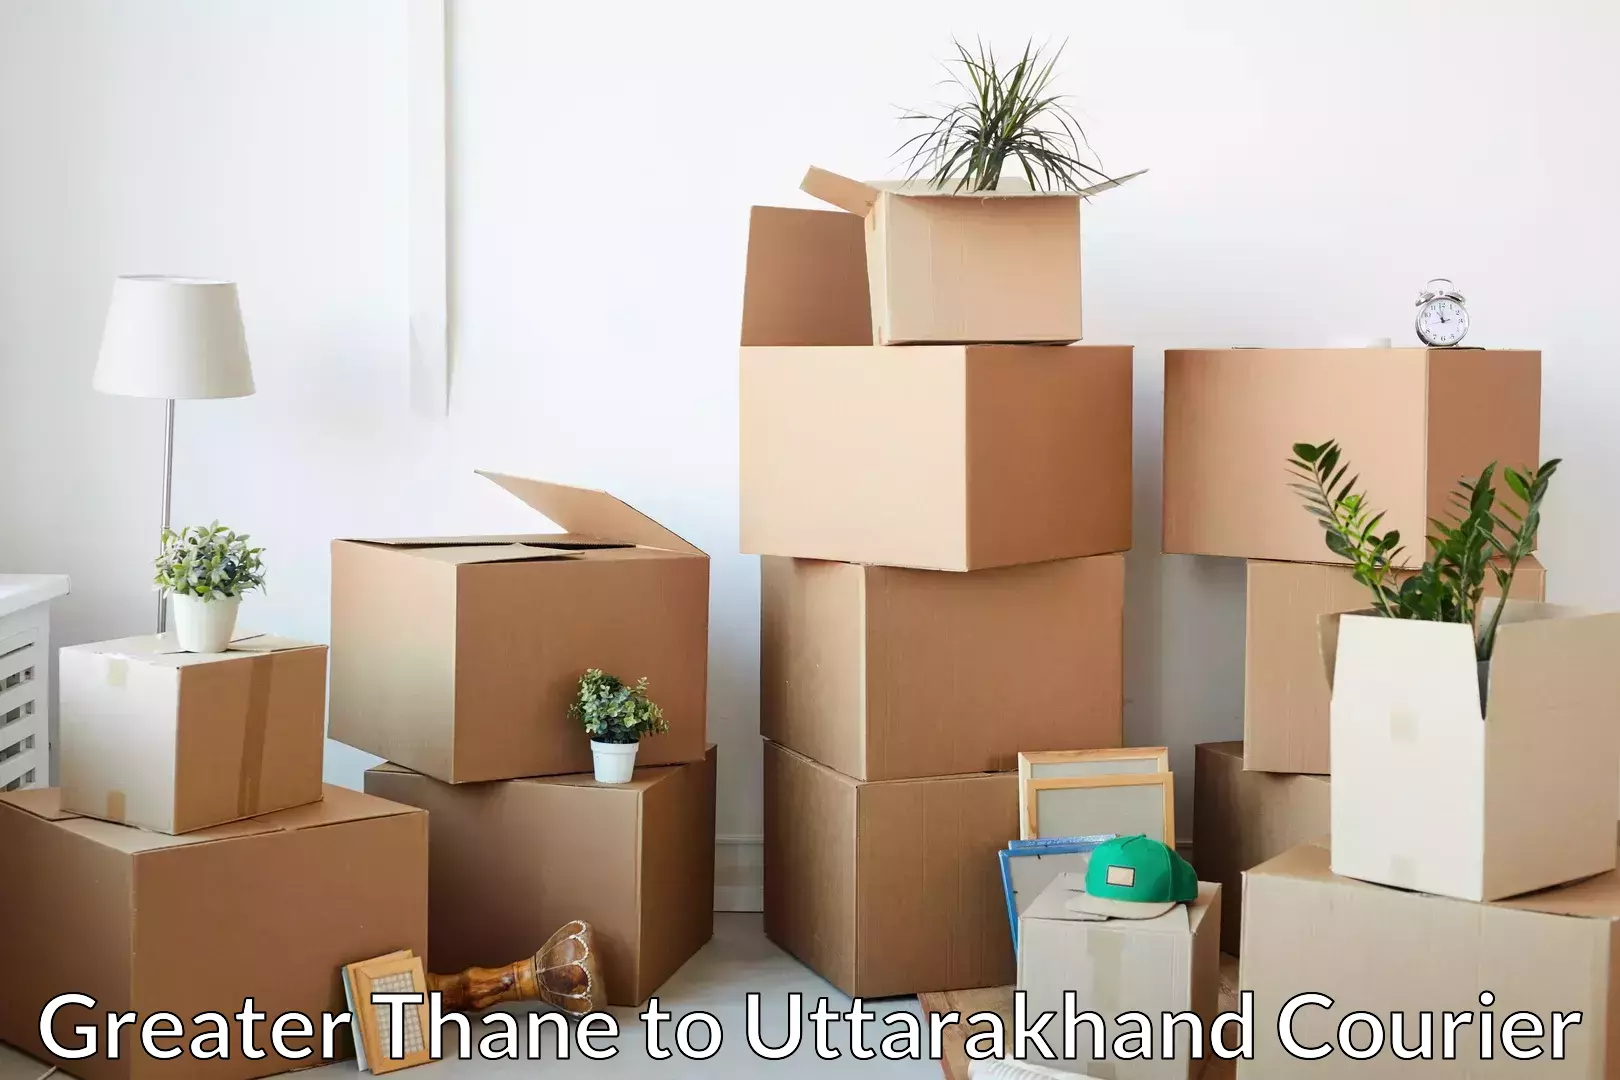 Furniture transport company Greater Thane to Tehri